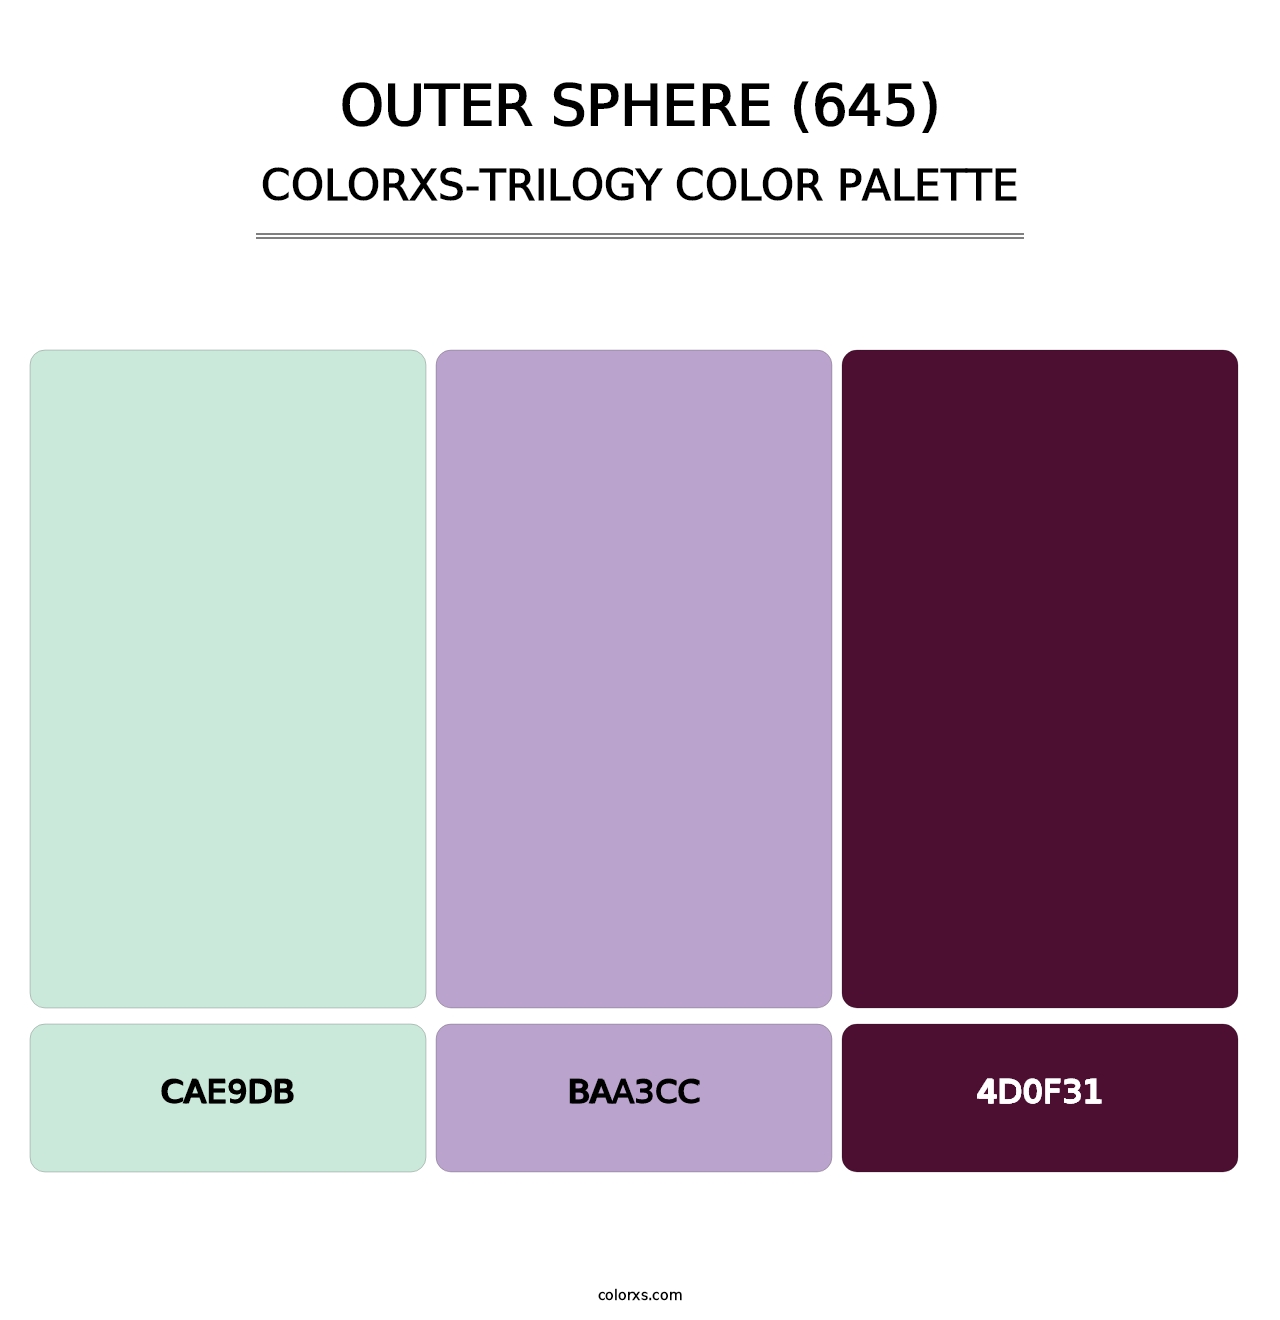 Outer Sphere (645) - Colorxs Trilogy Palette